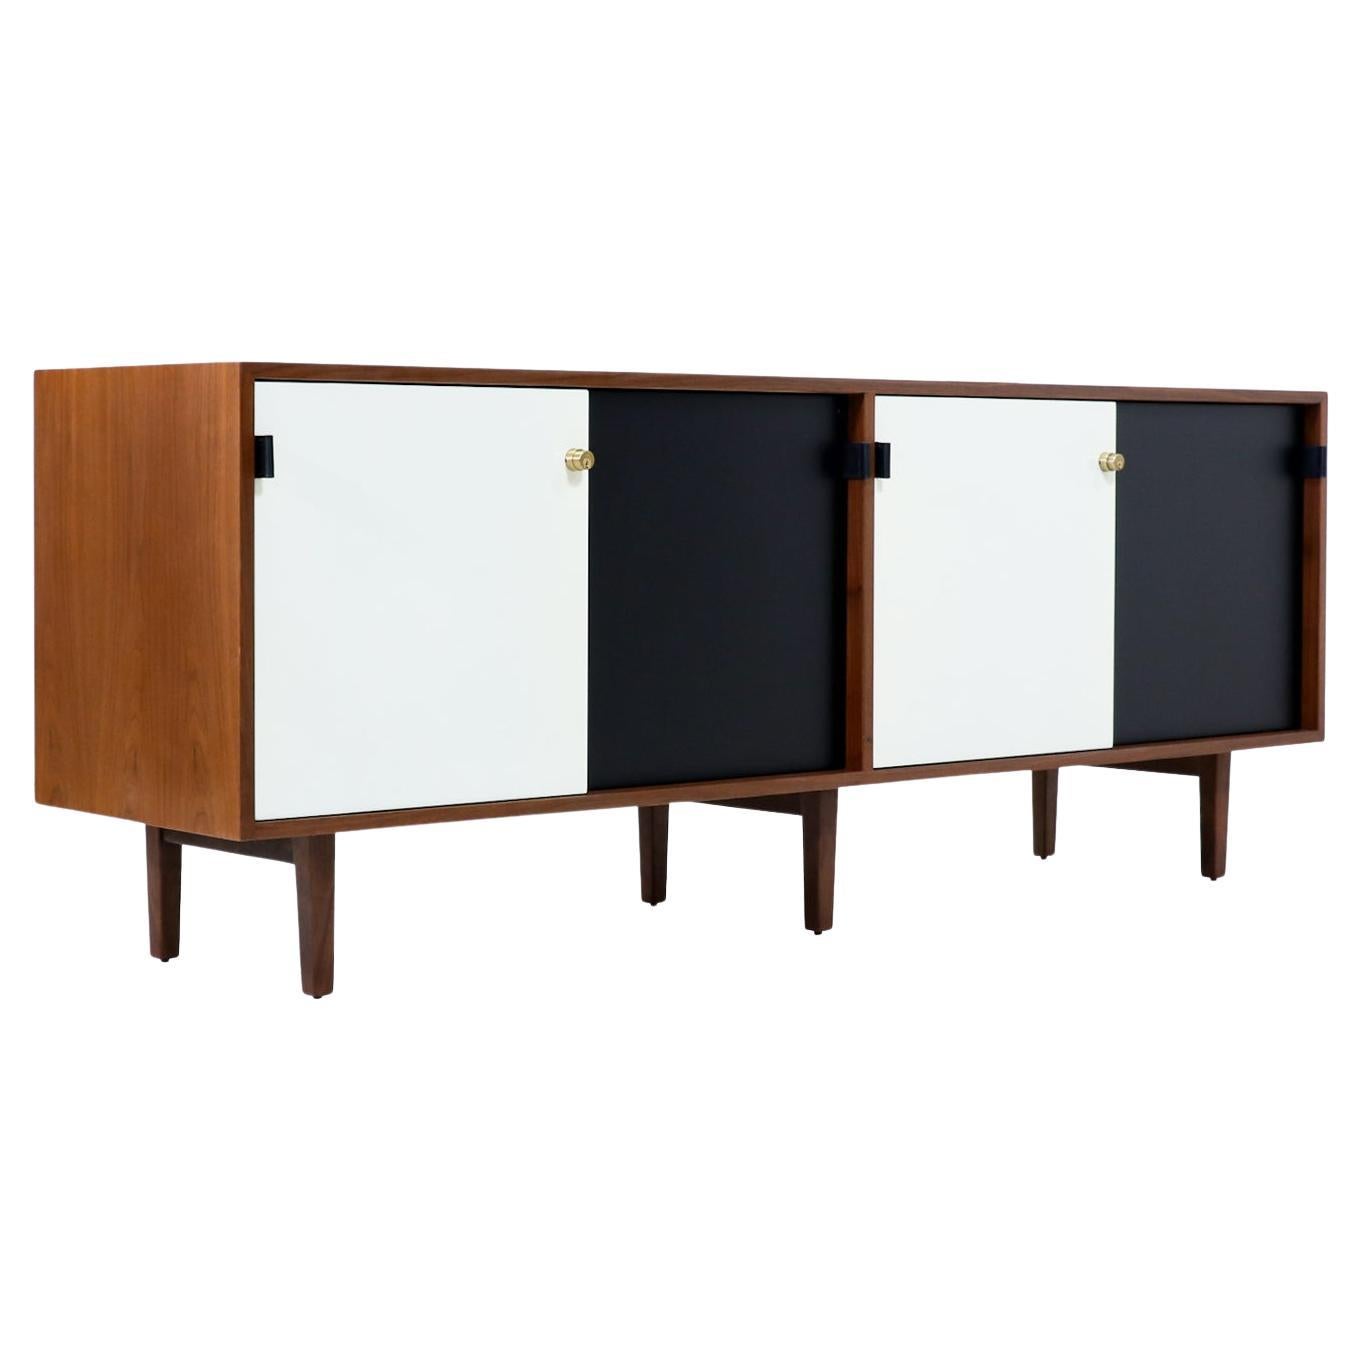 Mid-Century Modern Two-Tone Doors Lacquer Credenza von Florence Knoll  im Angebot